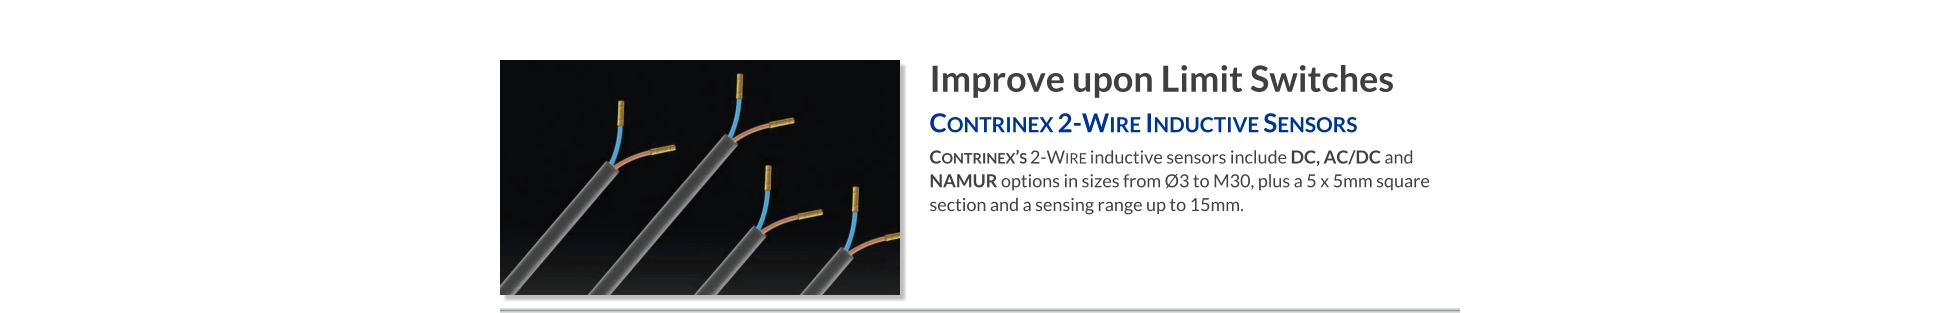 Improve upon Limit Switches Contrinex 2-Wire Inductive Sensors   Contrinex’s 2-Wire inductive sensors include DC, AC/DC and NAMUR options in sizes from Ø3 to M30, plus a 5 x 5mm square section and a sensing range up to 15mm.